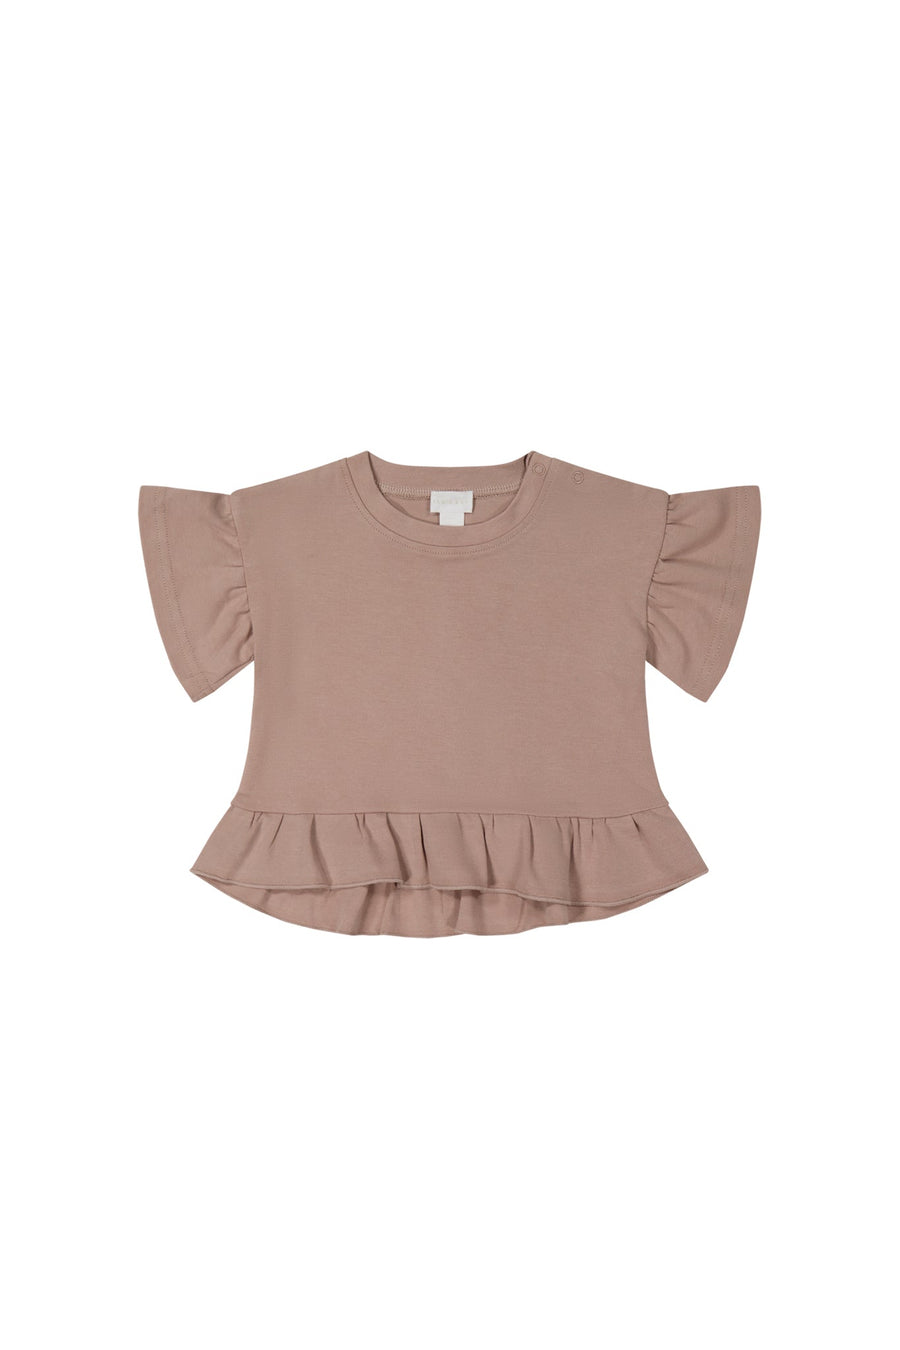 Pima Cotton Courtney Ruffle Top - Softest Mauve Childrens Top from Jamie Kay USA